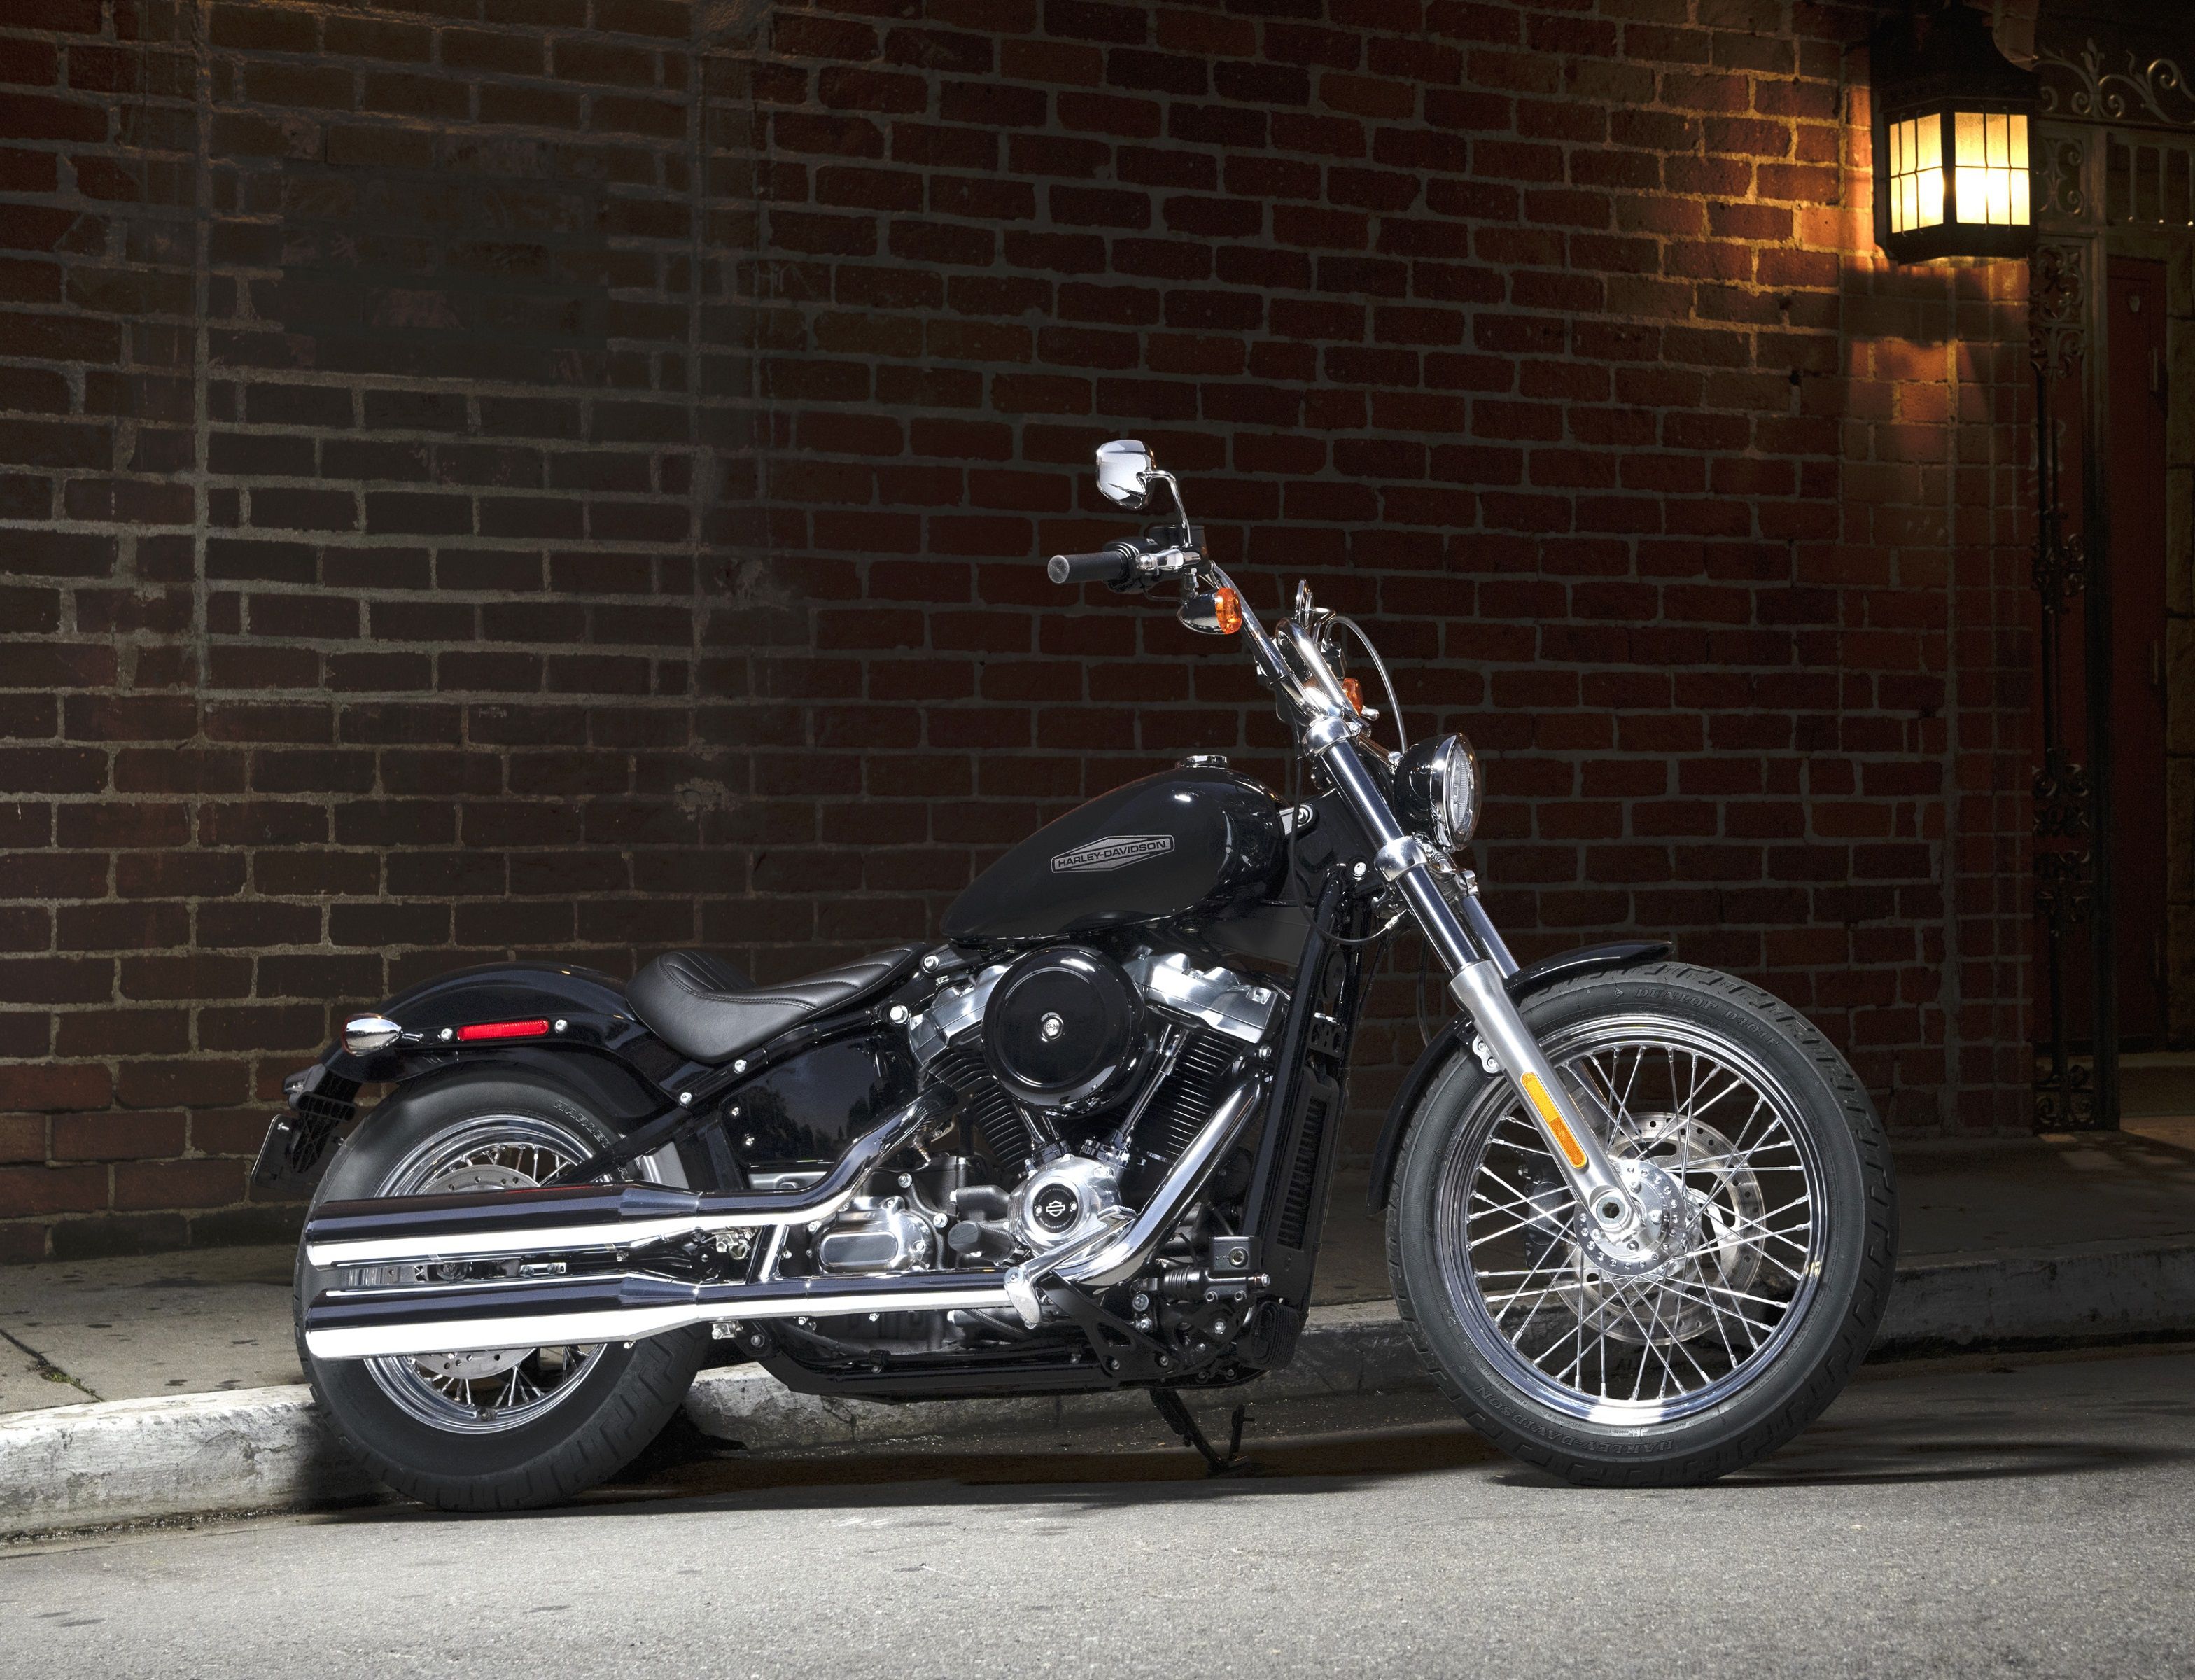 2020 Harley Davidson Softail Standard First Look Cycle World